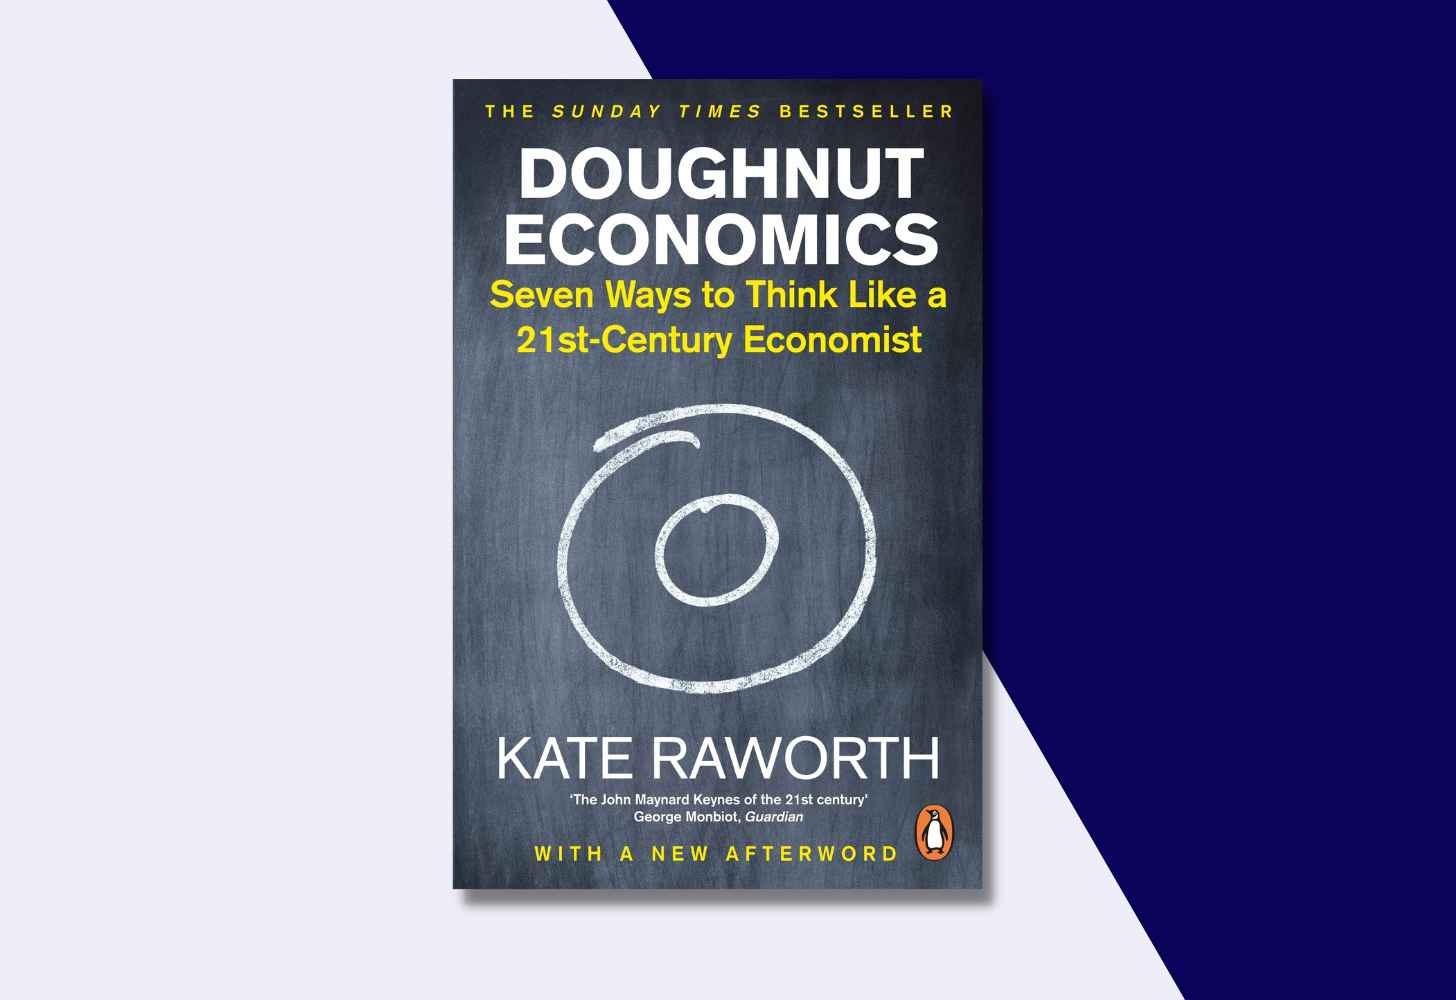 The Cover Of “Doughnut Economics: Seven Ways to Think Like a 21st-Century Economist” by Kate Raworth